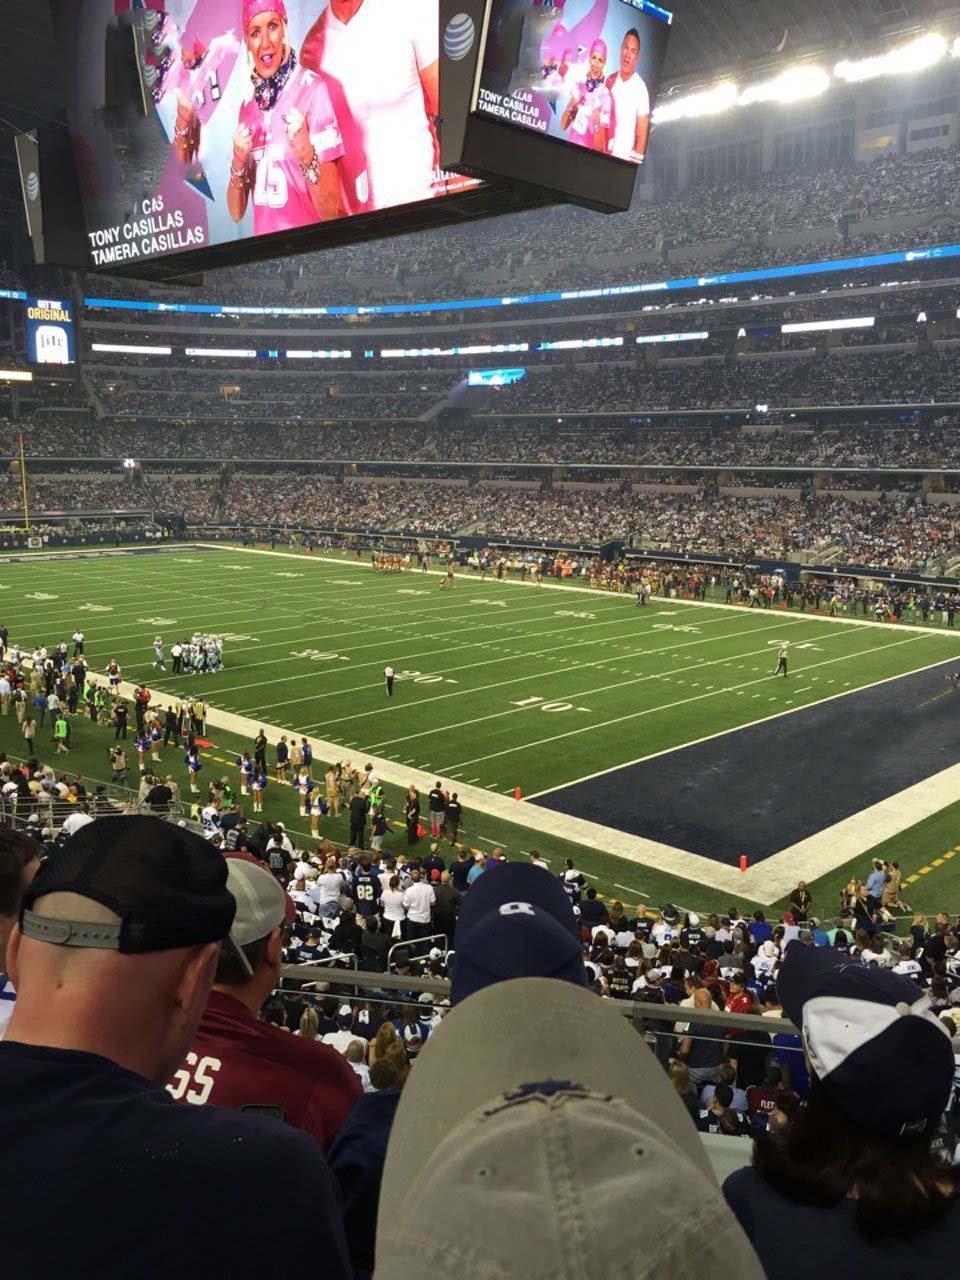 section 203, row 3 seat view  for football - at&t stadium (cowboys stadium)